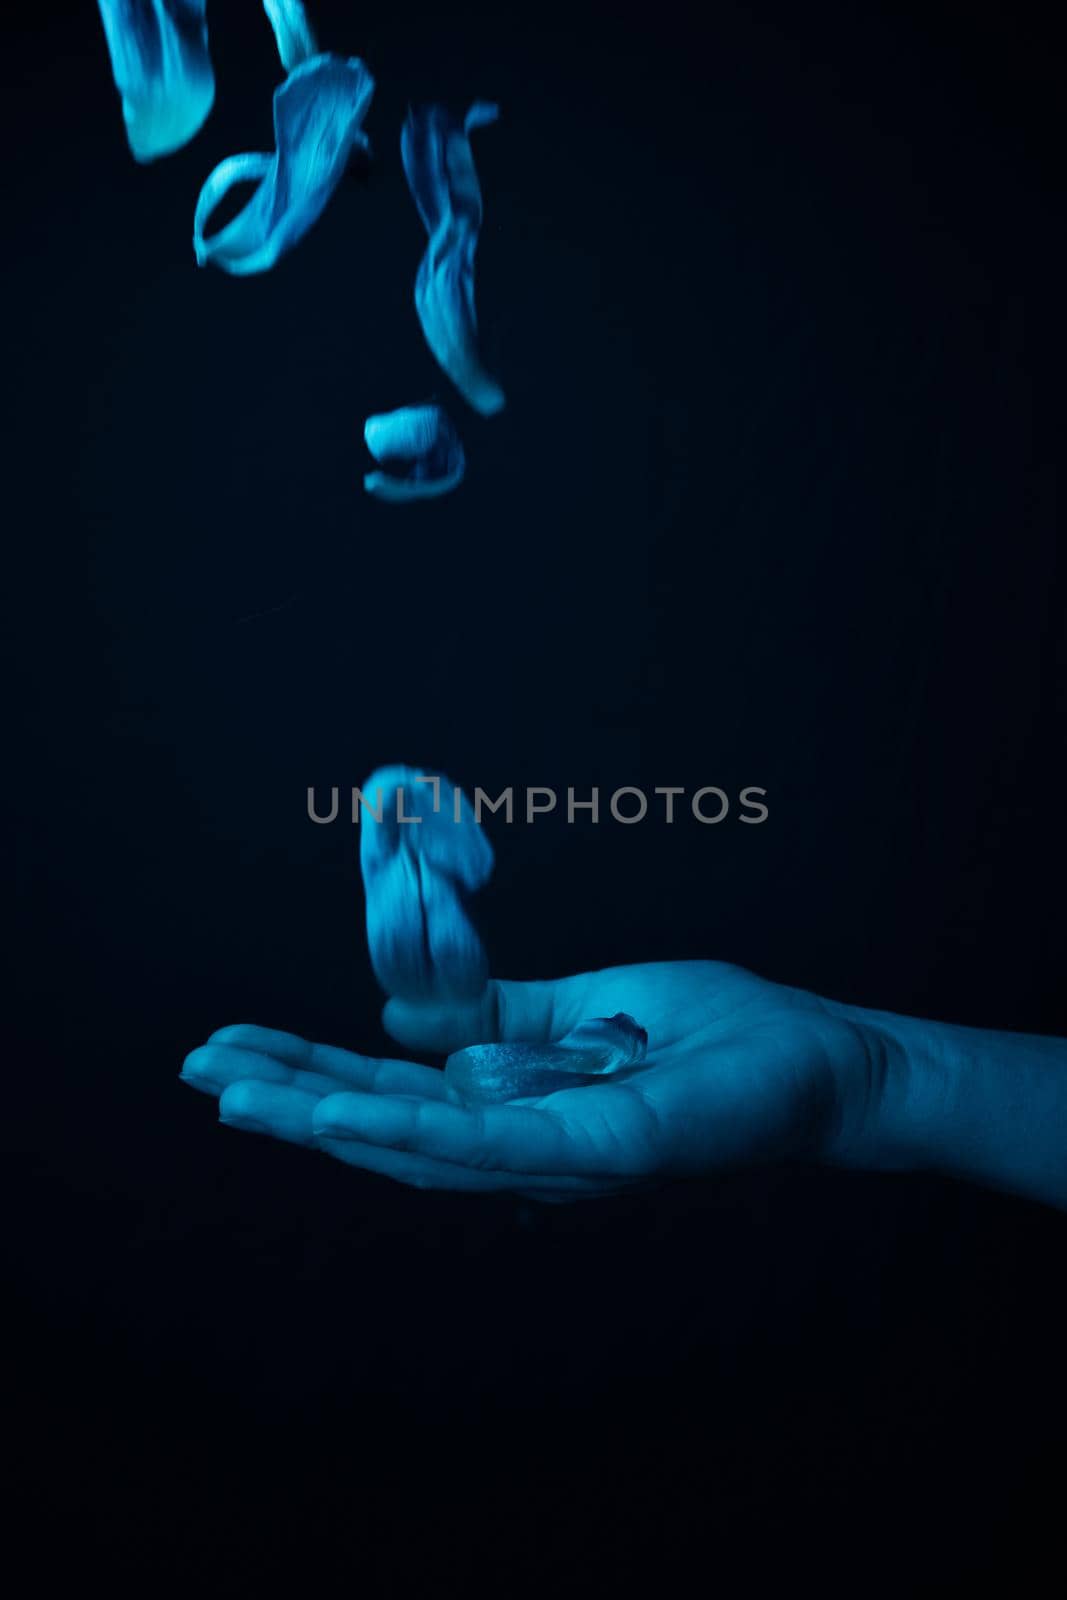 hand on a black background catches falling tulip petals